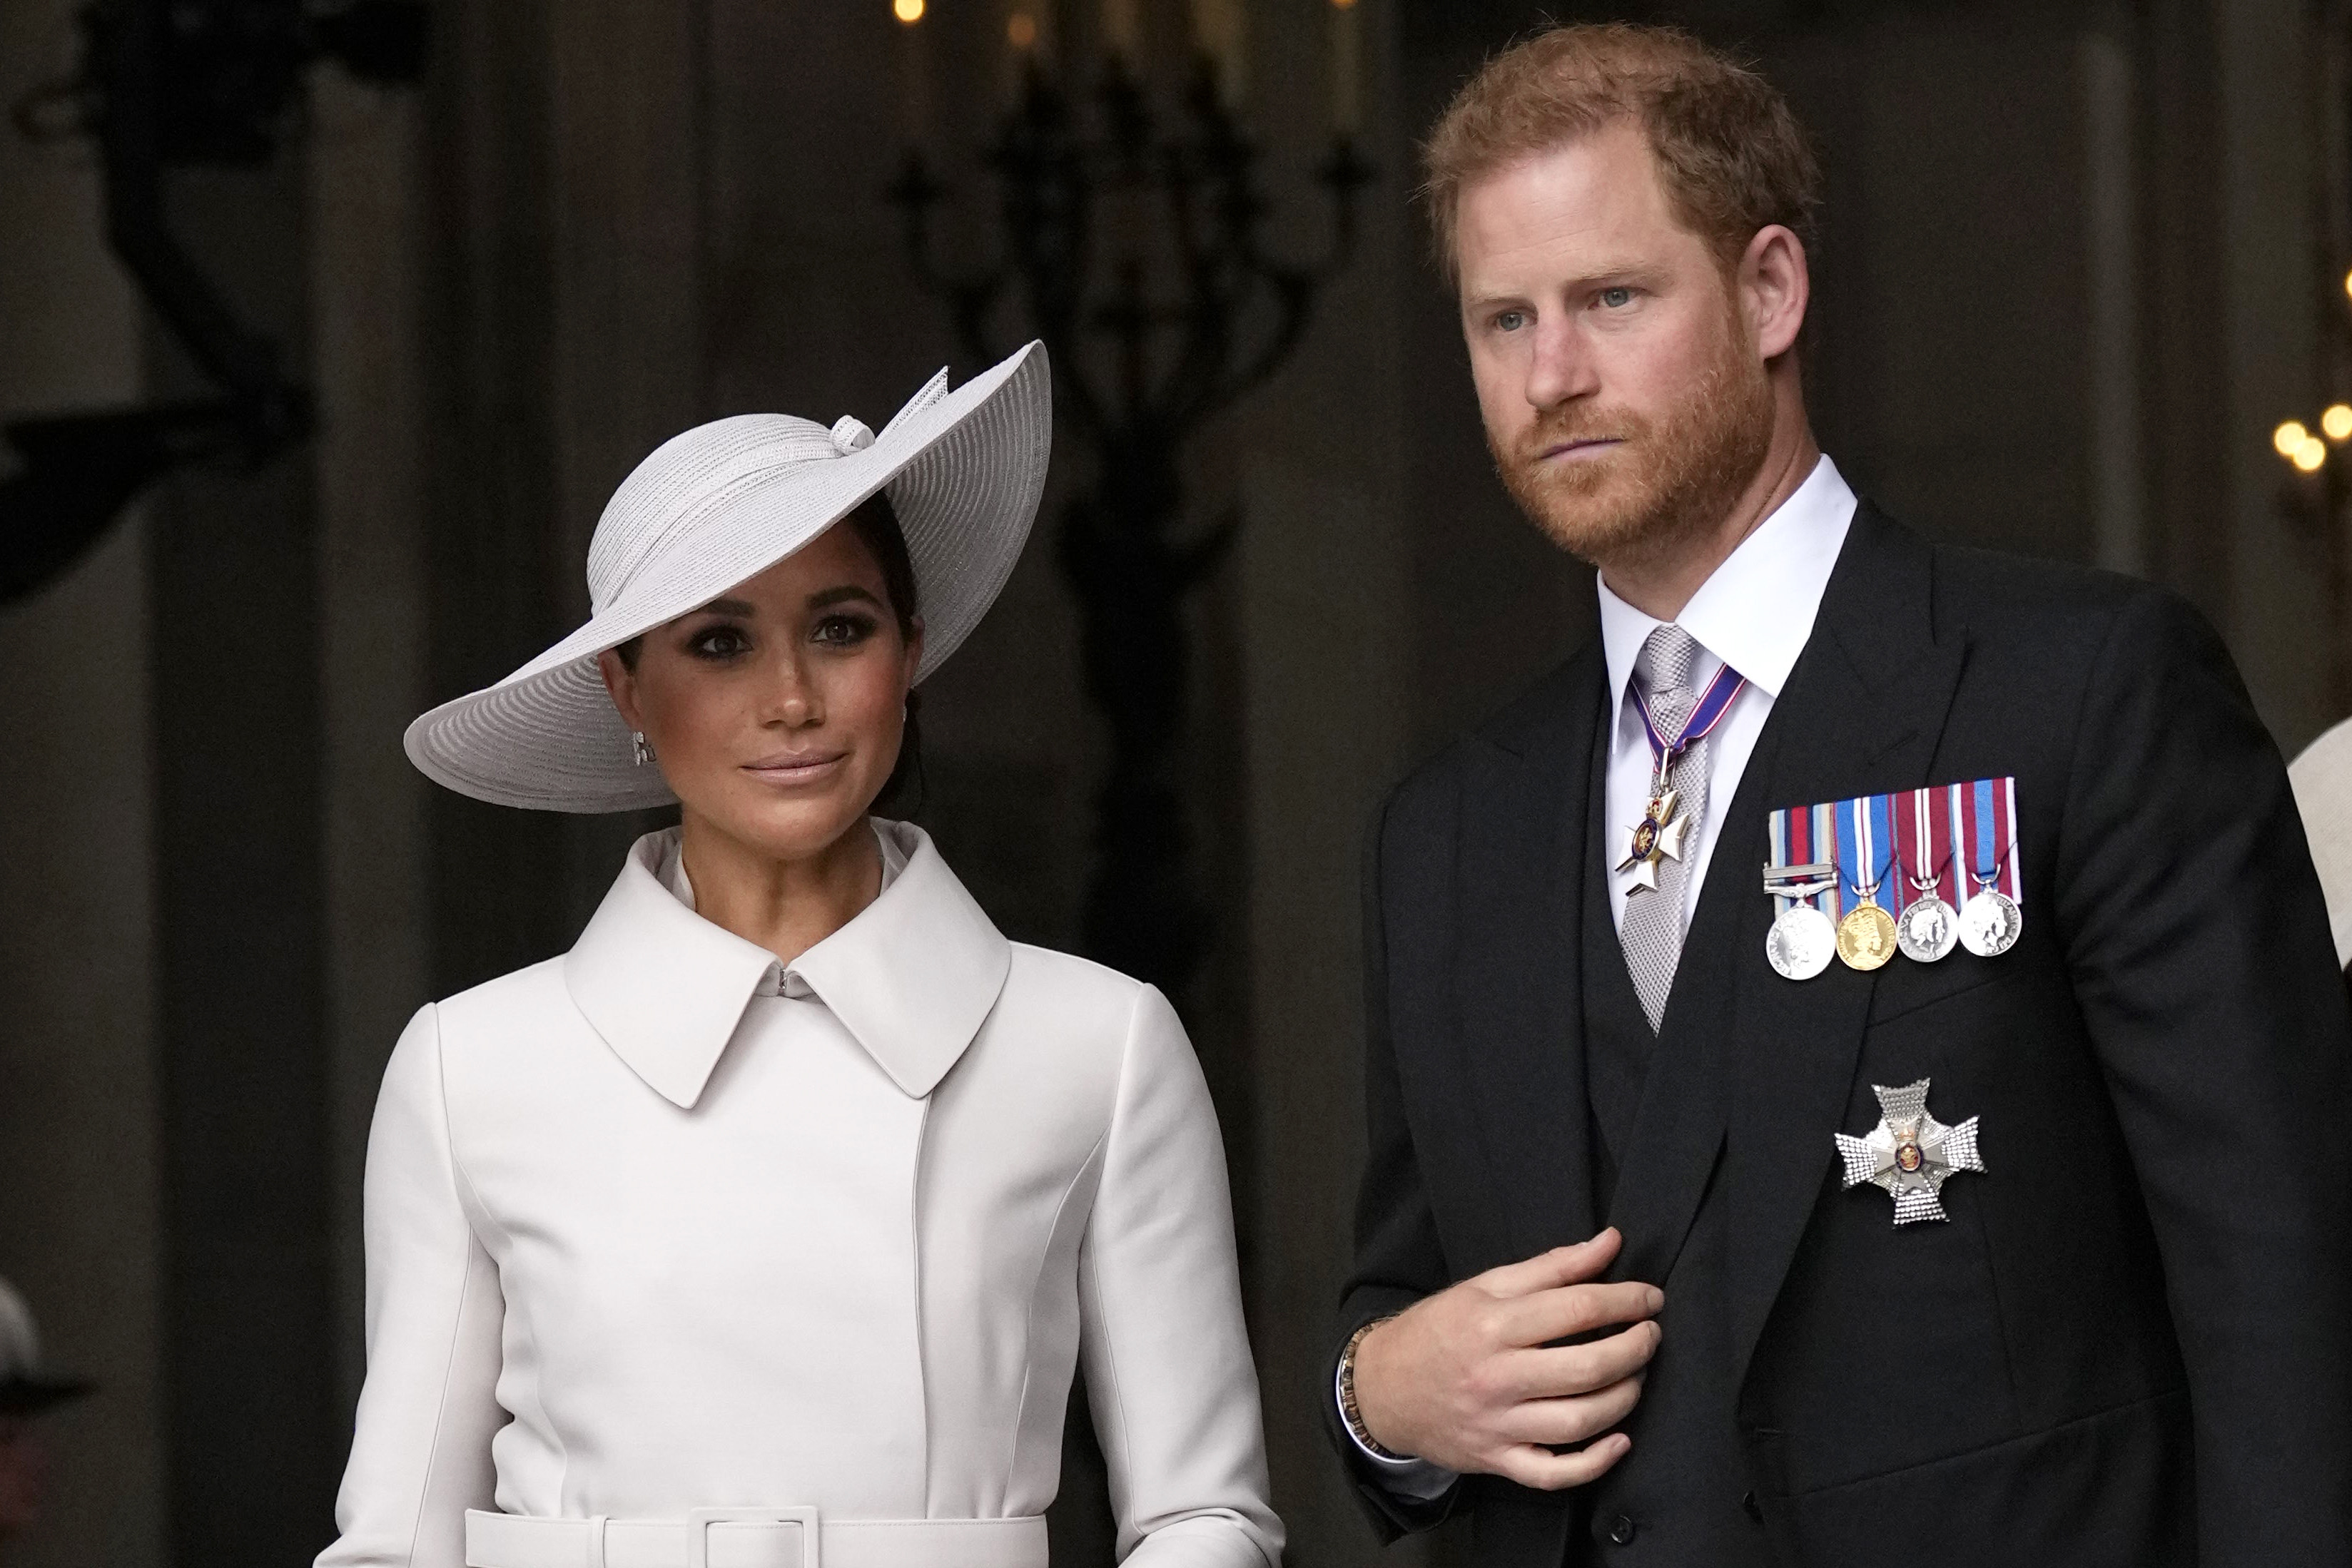 A former head of counter terrorism in the UK confirms the Duchess of Sussex has received death threats online and believes her life was in danger. Photo: Getty Images